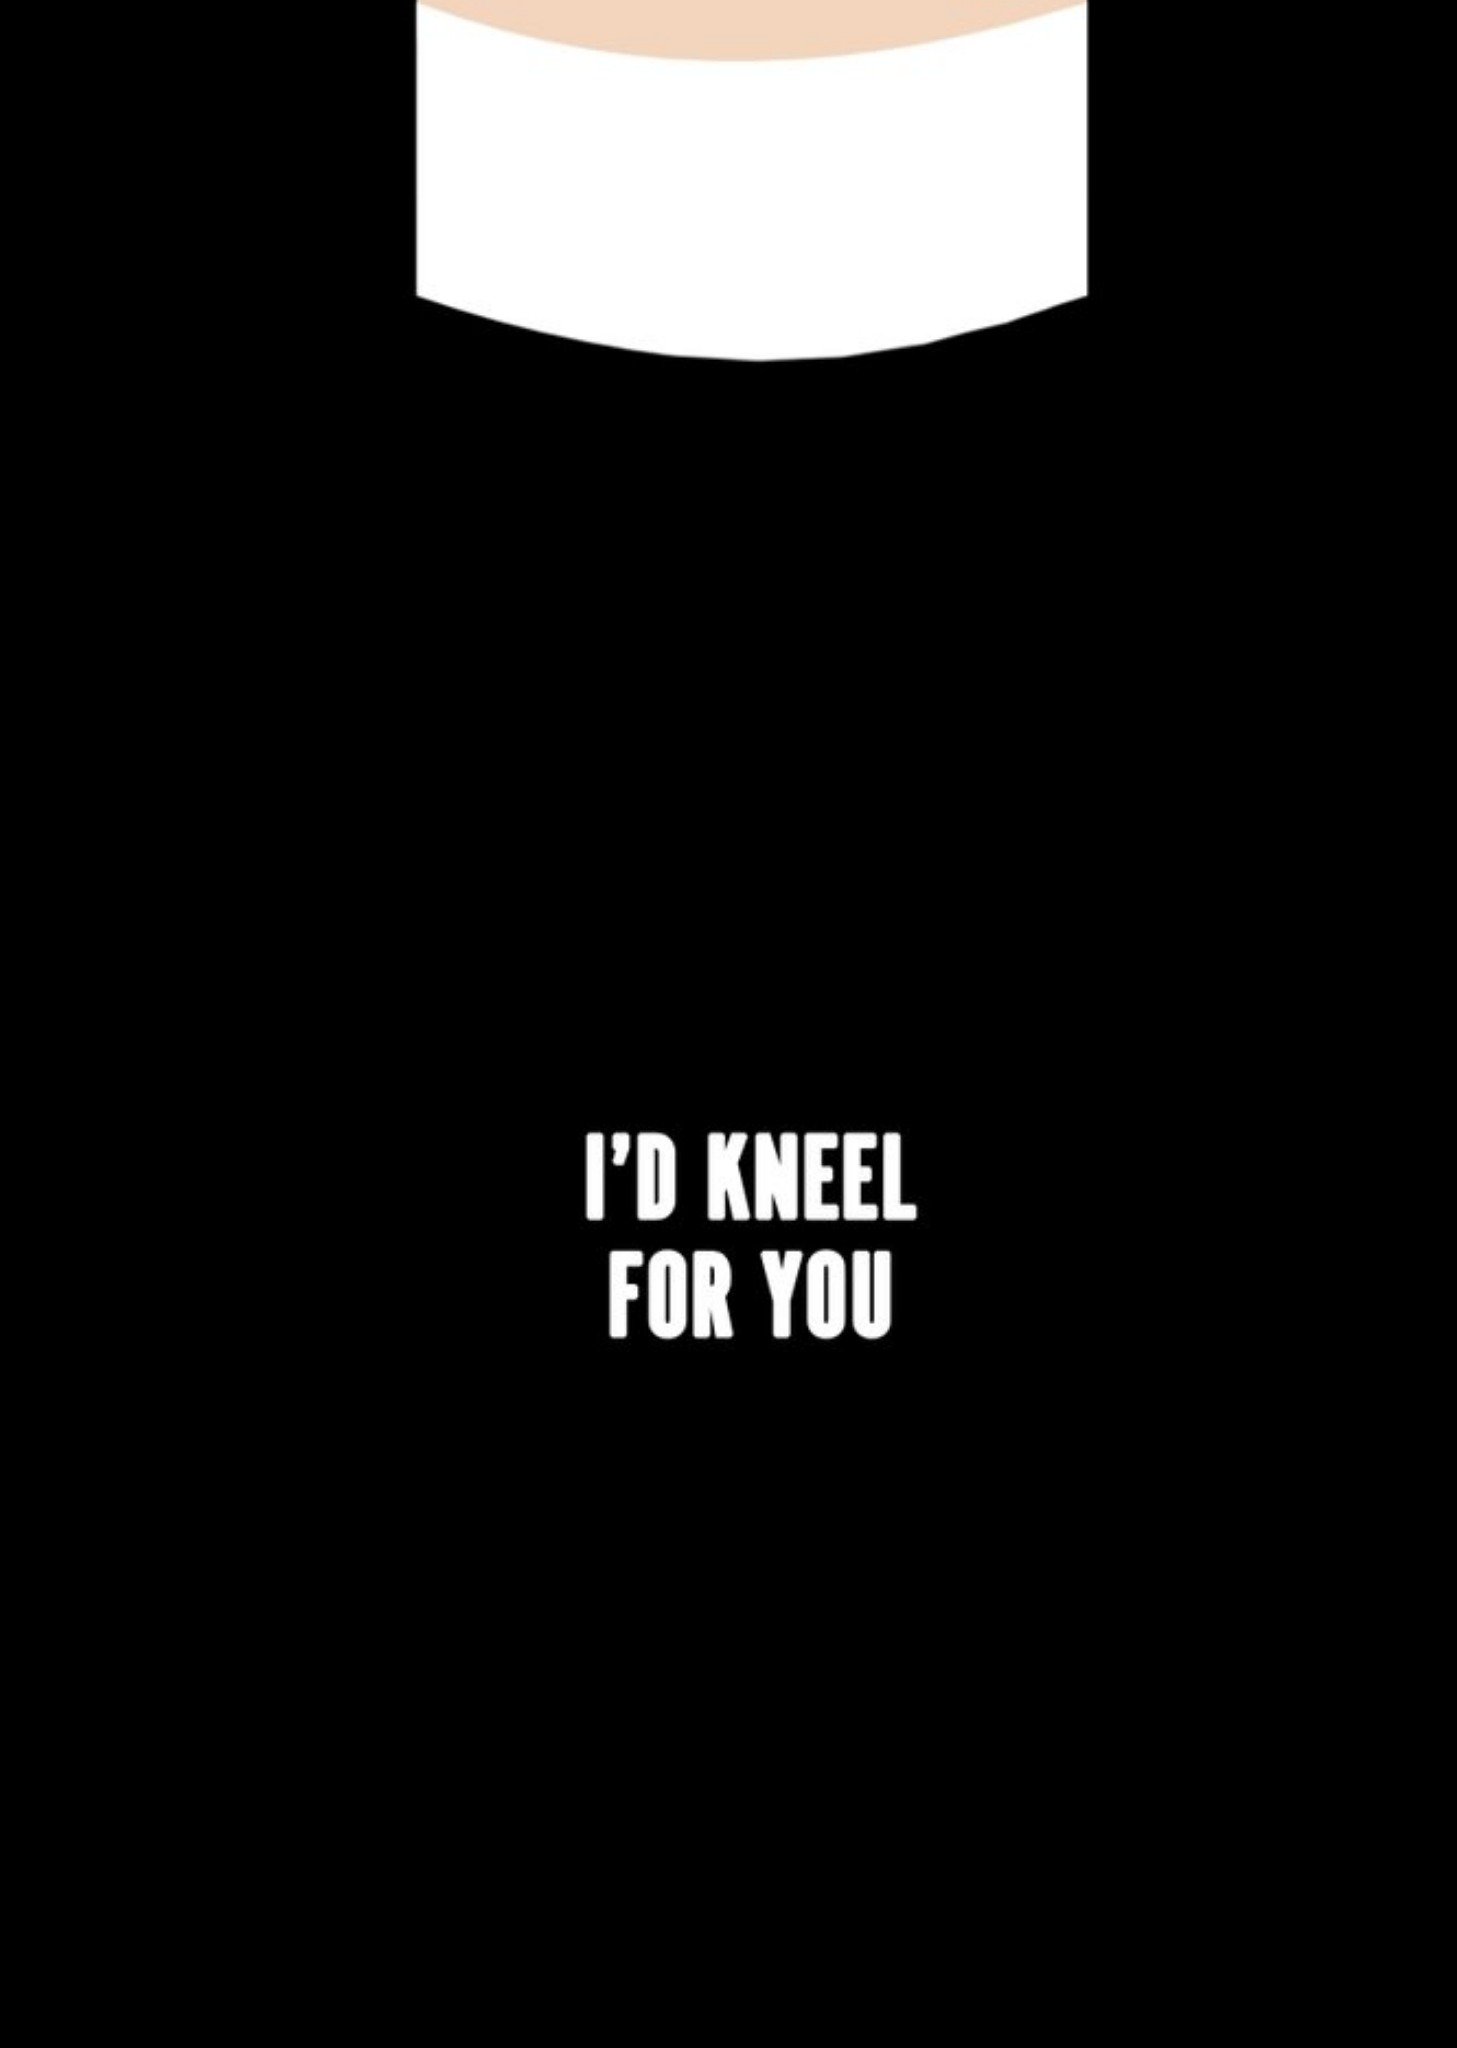 Moonpig Topical I'd Kneel For You Themed Valentine's Day Card, Large